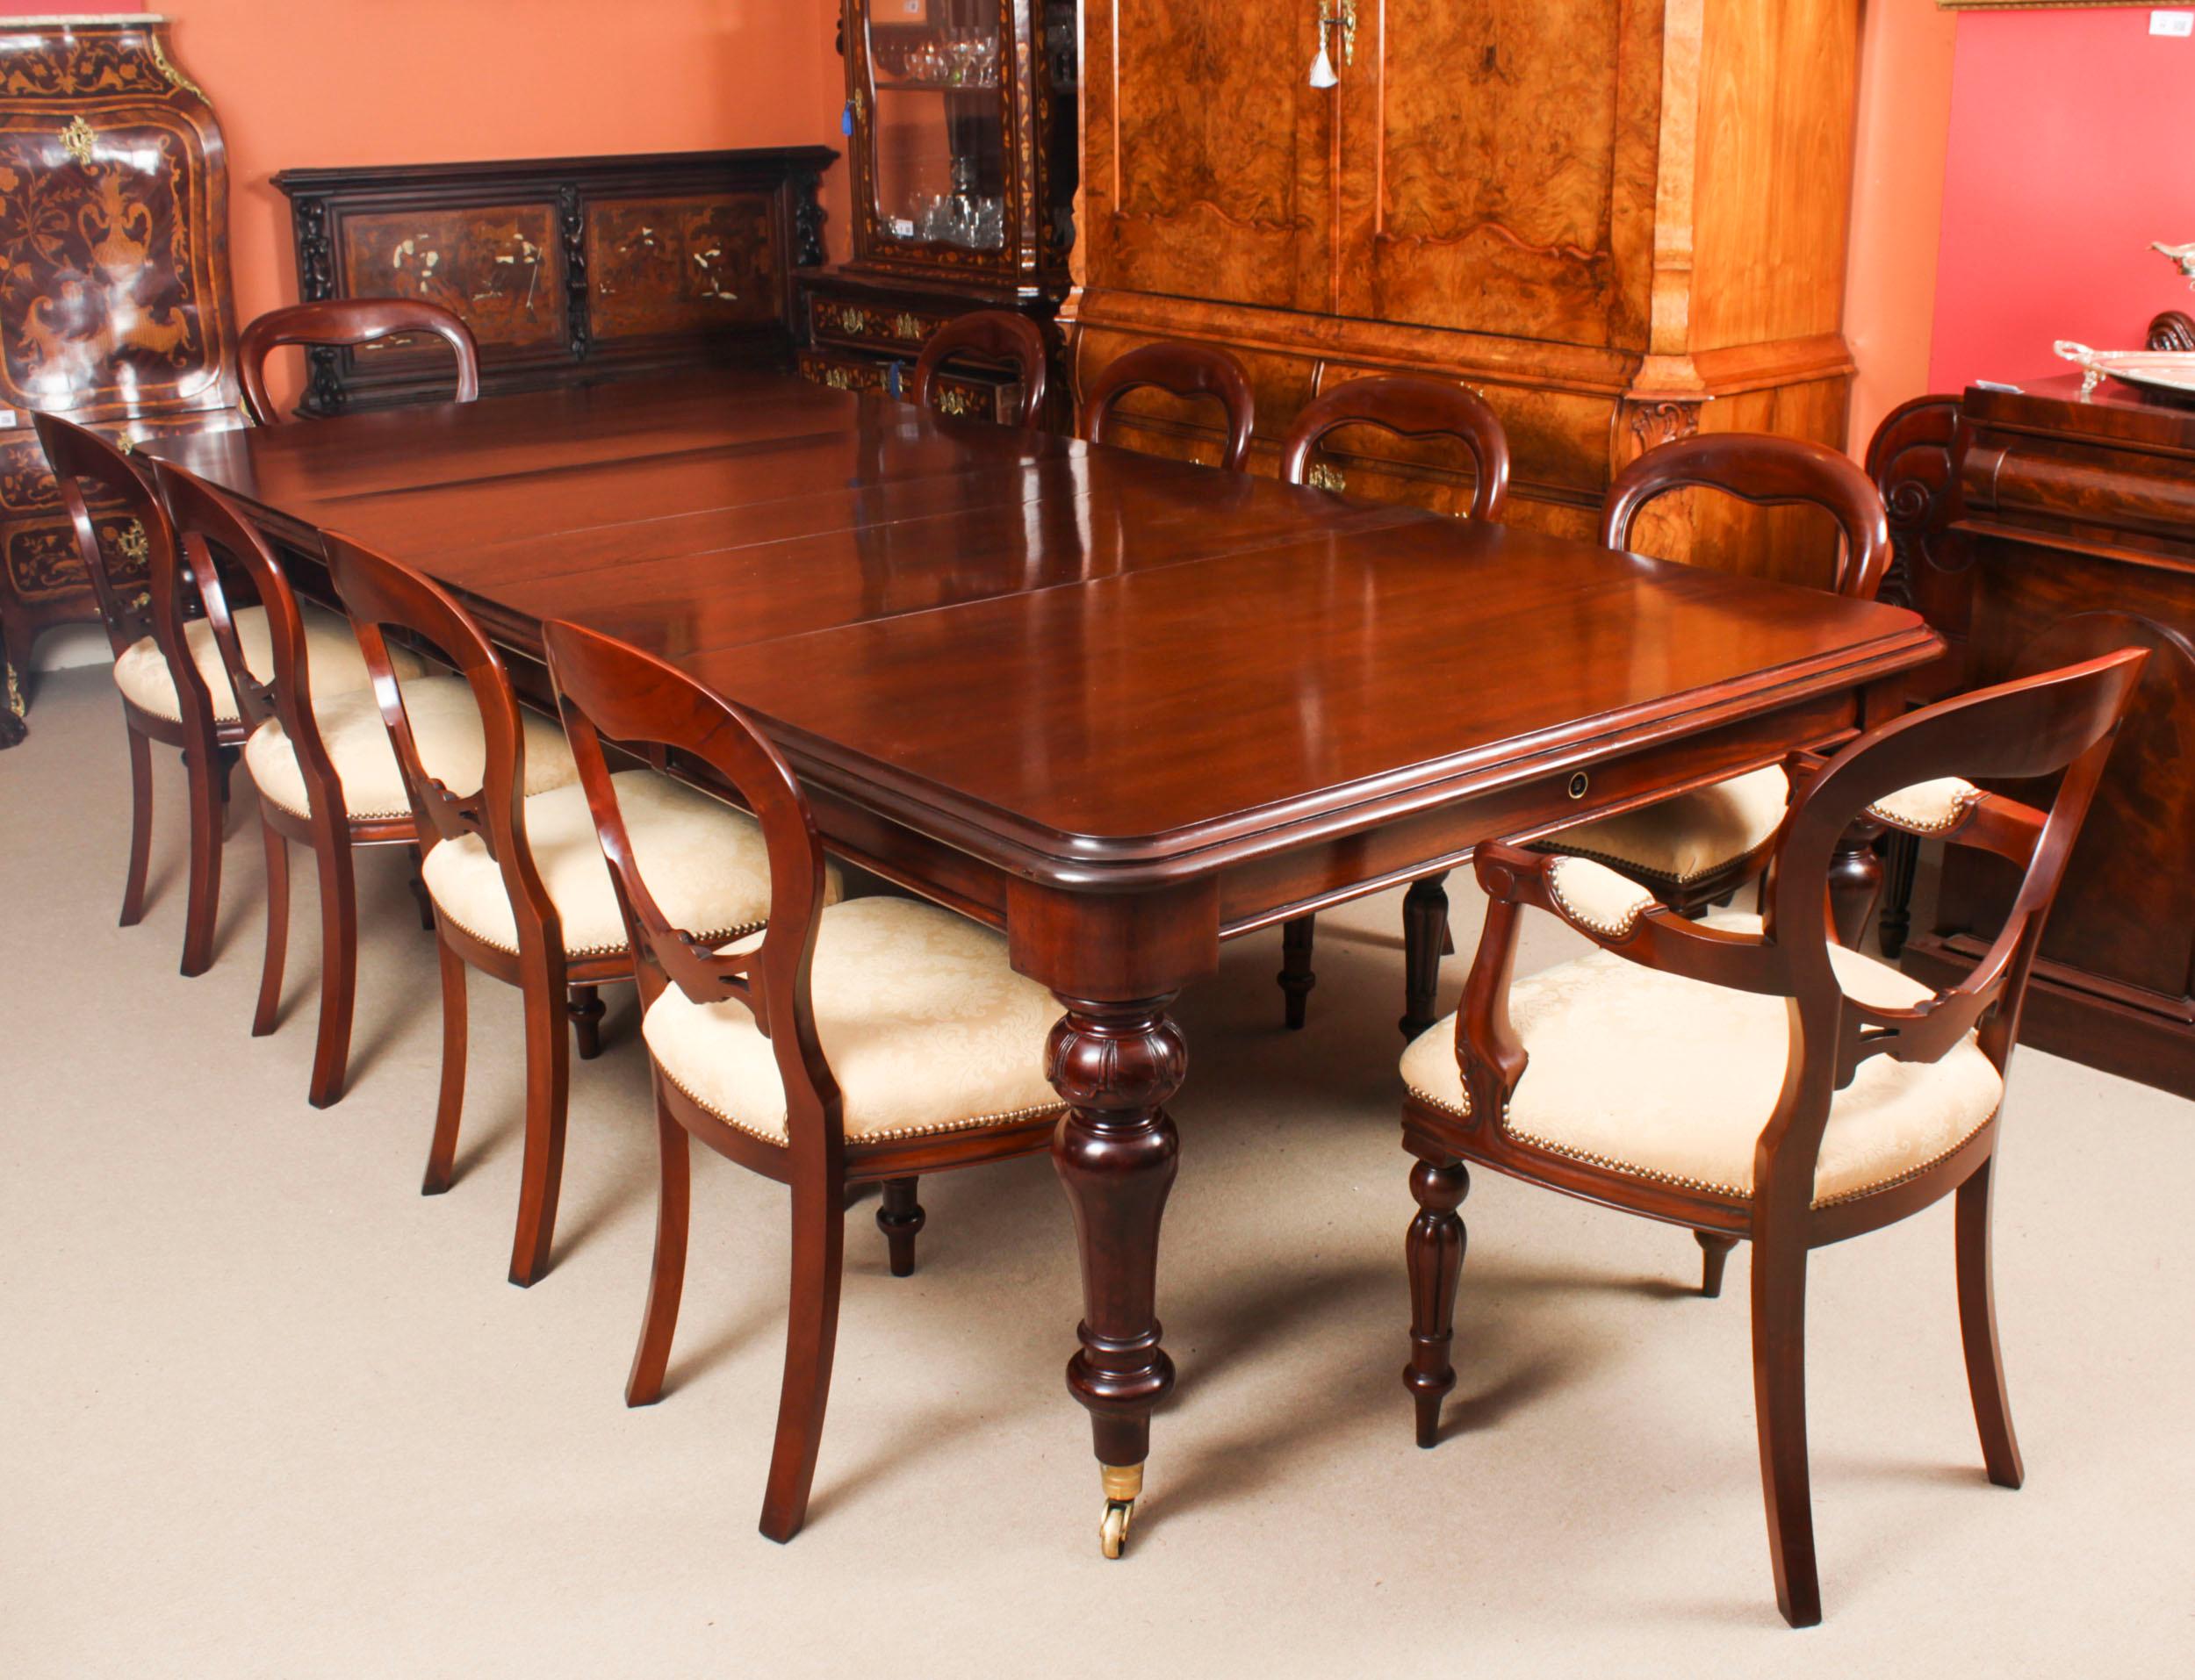 This is a magnificent antique William IV solid mahogany dining table which can seat ten diners in comfort, and is Circa 1835 in date.

This beautiful table is in stunning  flame mahogany and has three  leaves which  can be added or removed as